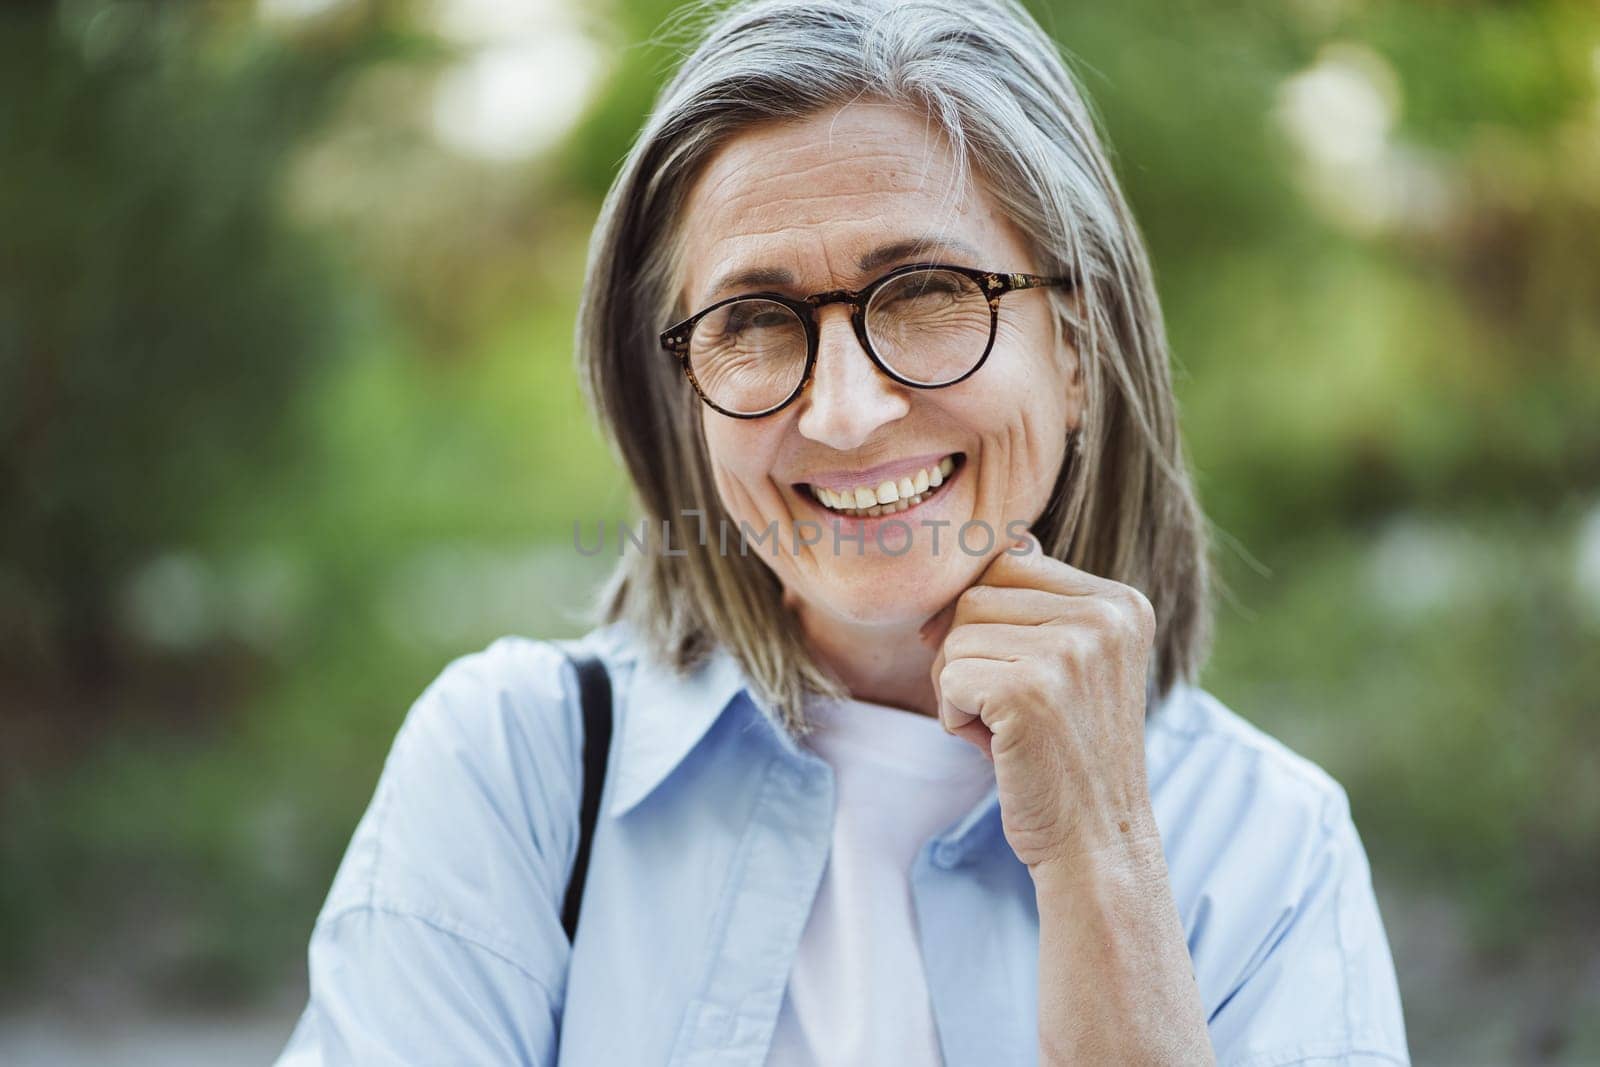 Senior woman with grey hair smiling in park. Genuine moment of happiness and joy as woman enjoys serene environment of park. Her smiling expression reflects positive outlook and contentment. . High quality photo